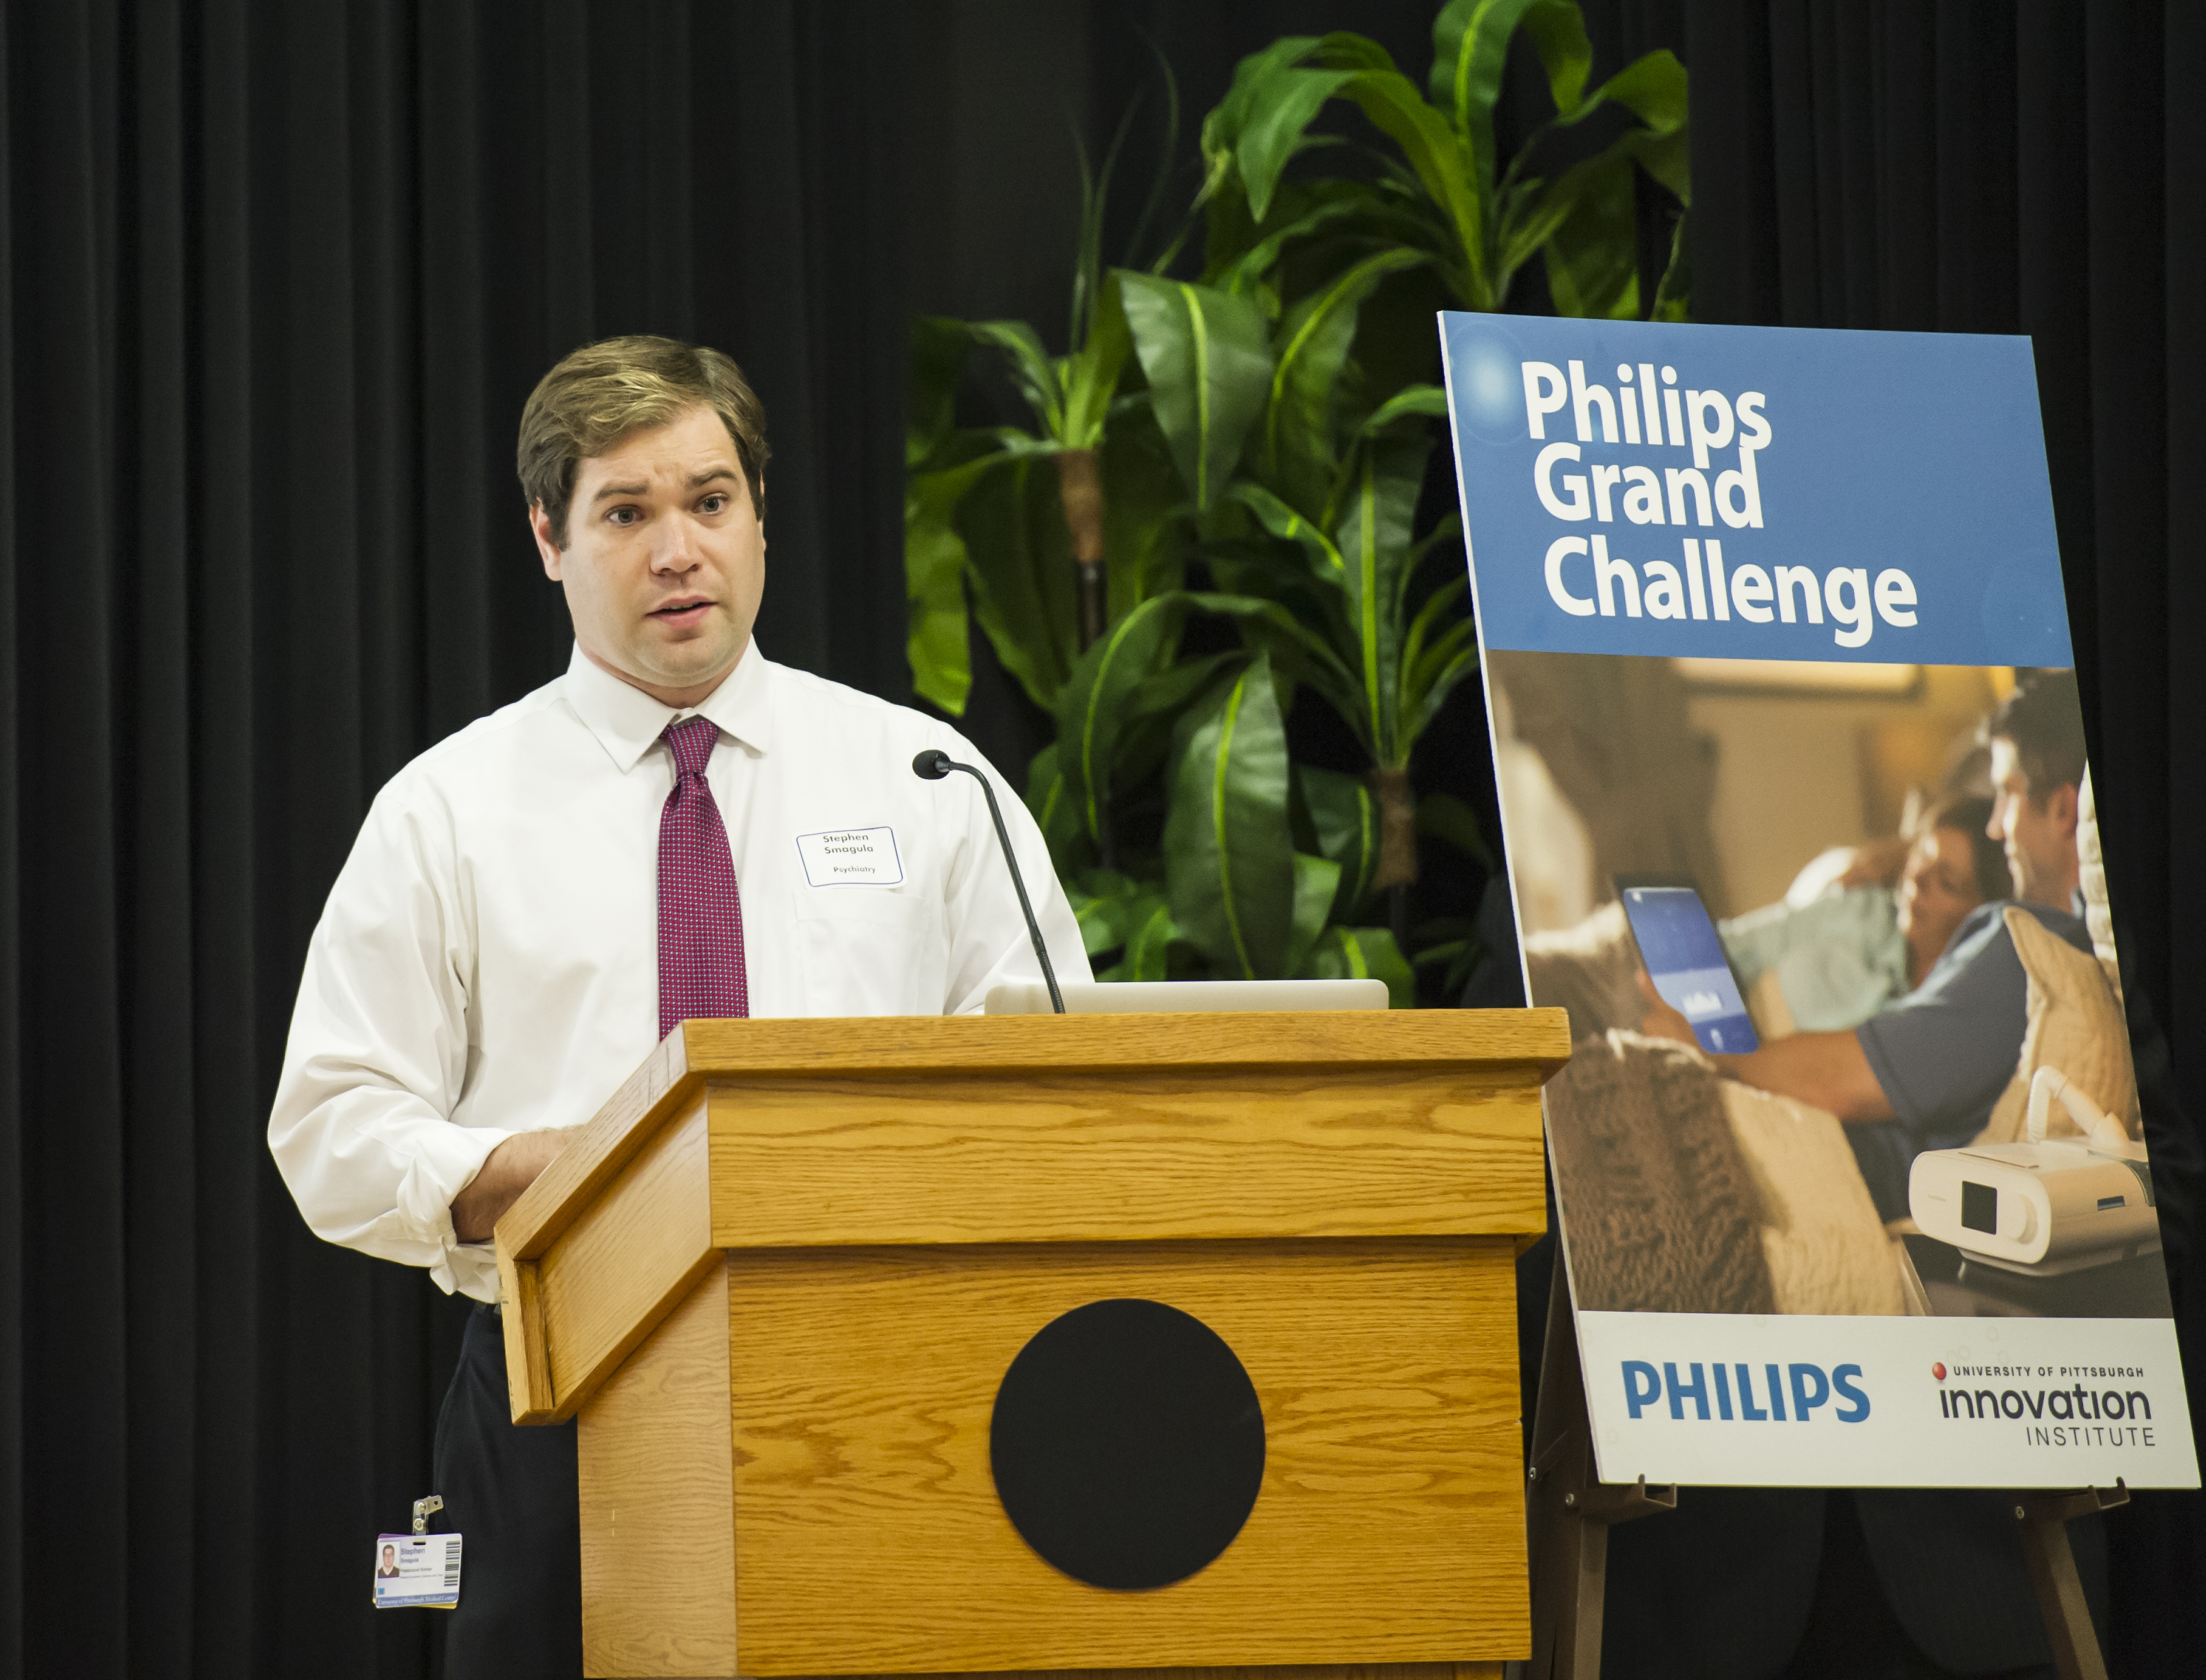 Stephen Smagula is the grand prize Winner of the Phillips Grand Challenge, an innovation challenge sponsored by Phillips, during a reception held at the O'Hara Student Center, Wednesday, November 1, 2017. 1726